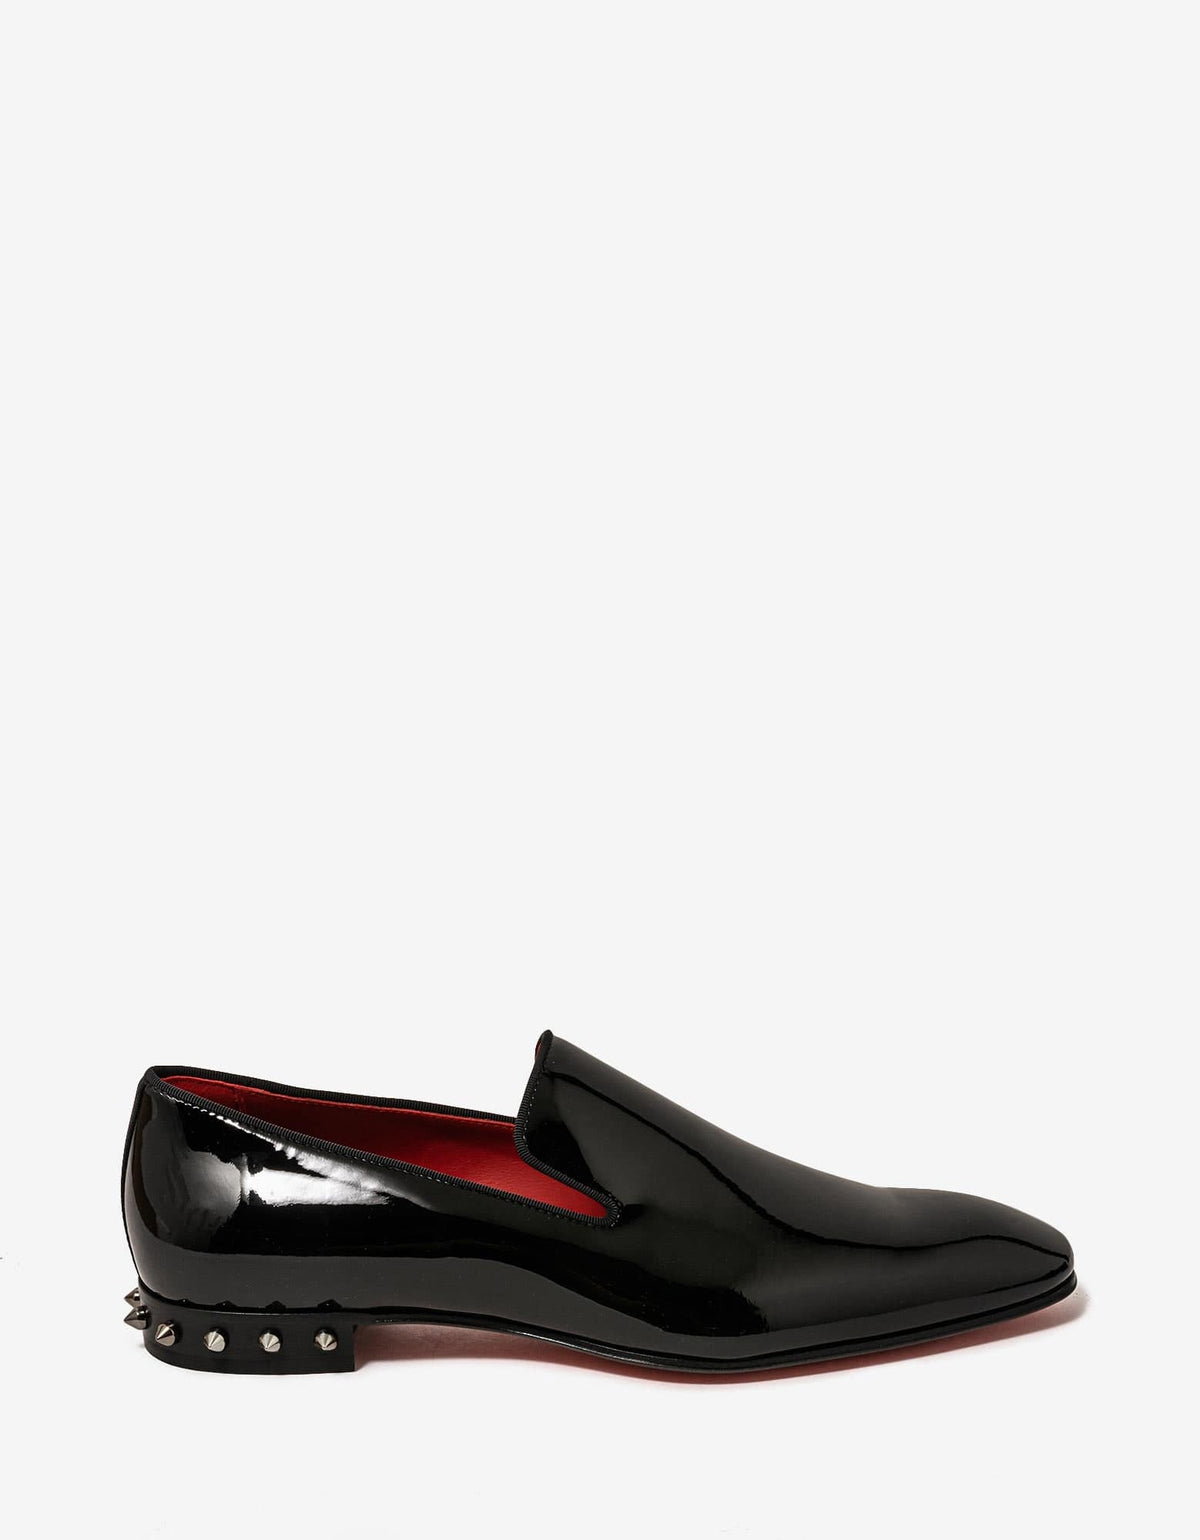 Christian Louboutin - Marquees Black Patent Shoes -